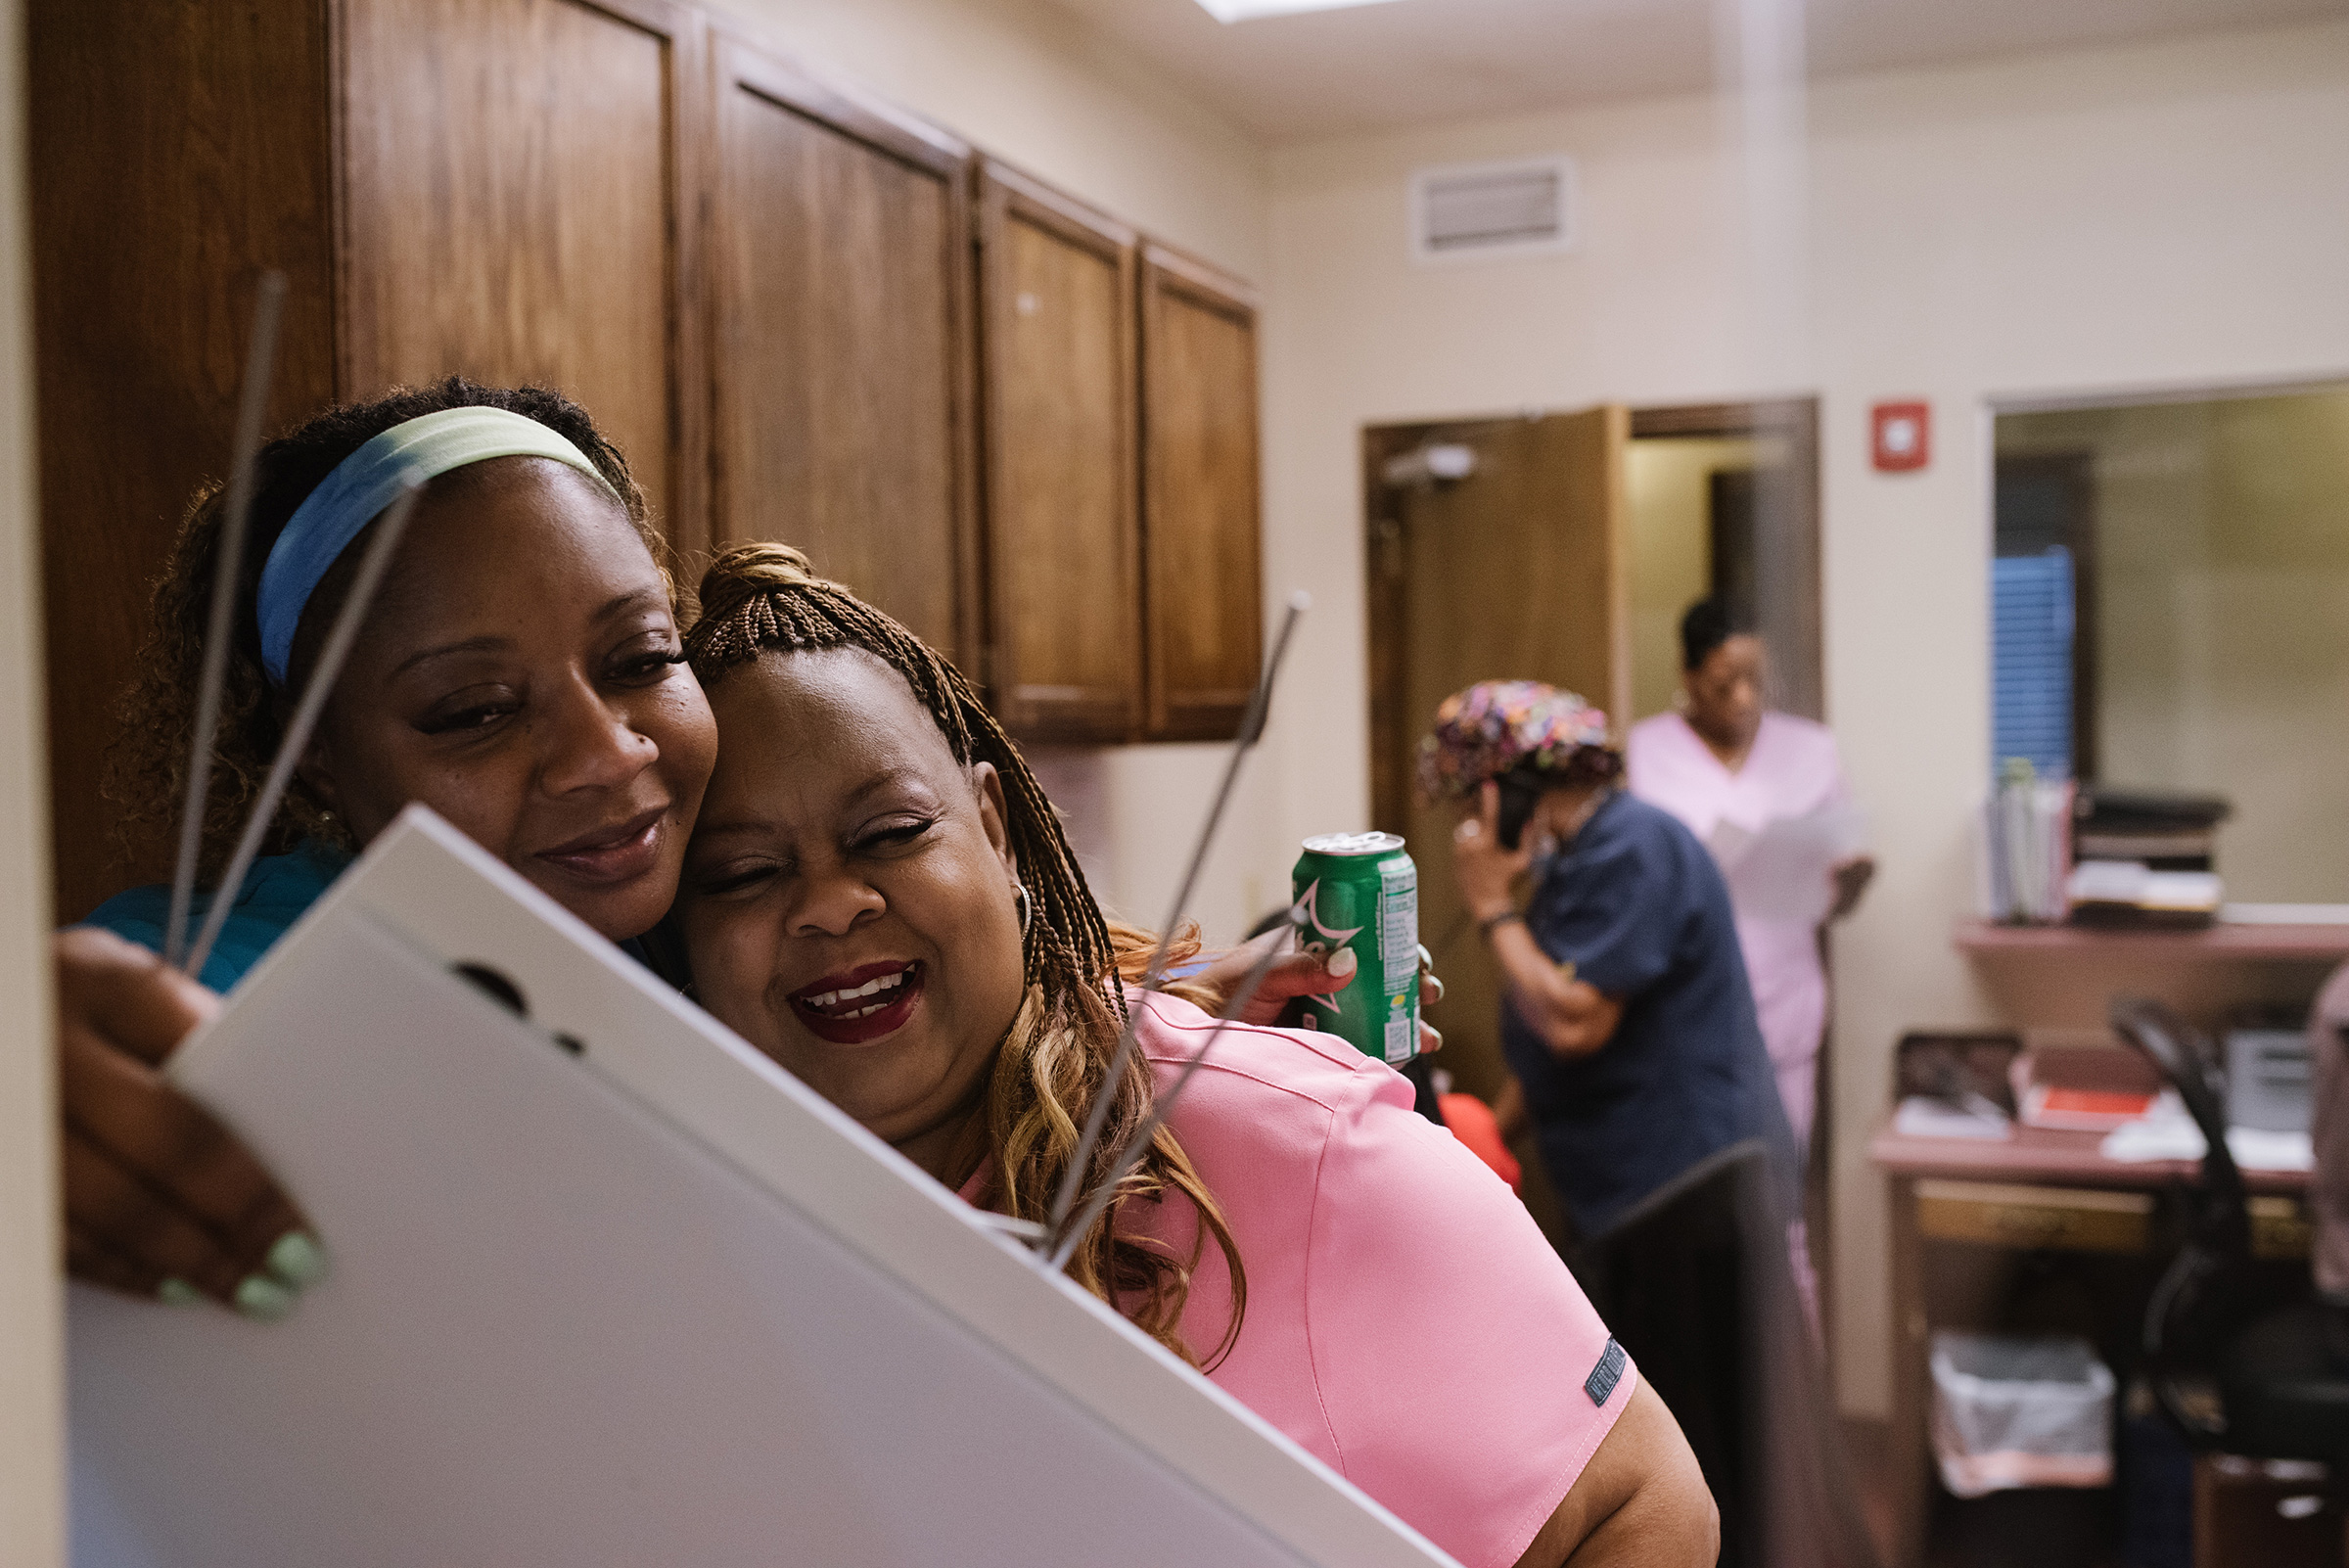 Medical assistant Ramona Wallace, left, embraces Gail Latham at <a href="https://time.com/6200914/alabama-clinic-after-roe-v-wade/">West Alabama Women’s Center</a> on July 11, a couple of weeks after the U.S. Supreme Court overturned Roe v. Wade. (Lucy Garrett for TIME)